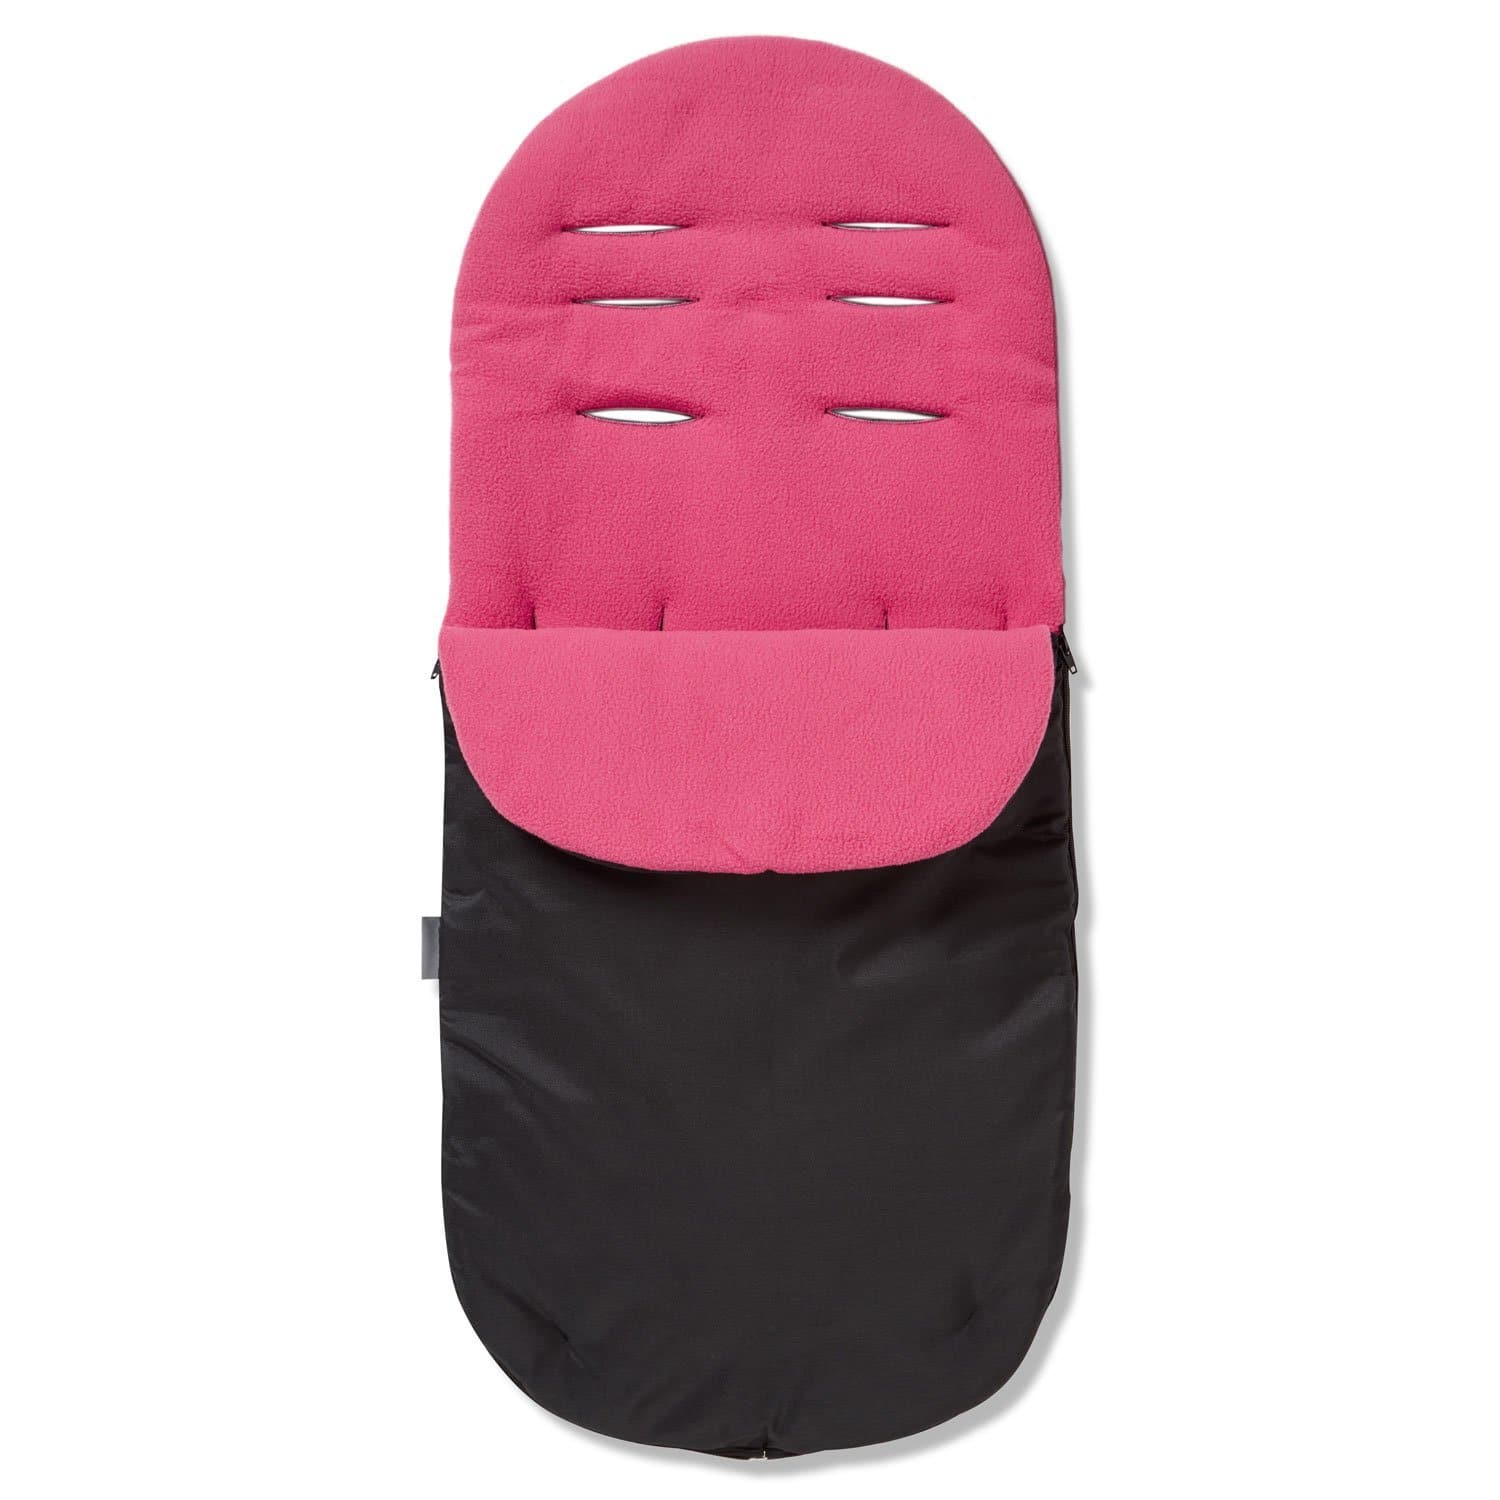 Footmuff / Cosy Toes Compatible with Roma - Dark Pink / Fits All Models | For Your Little One